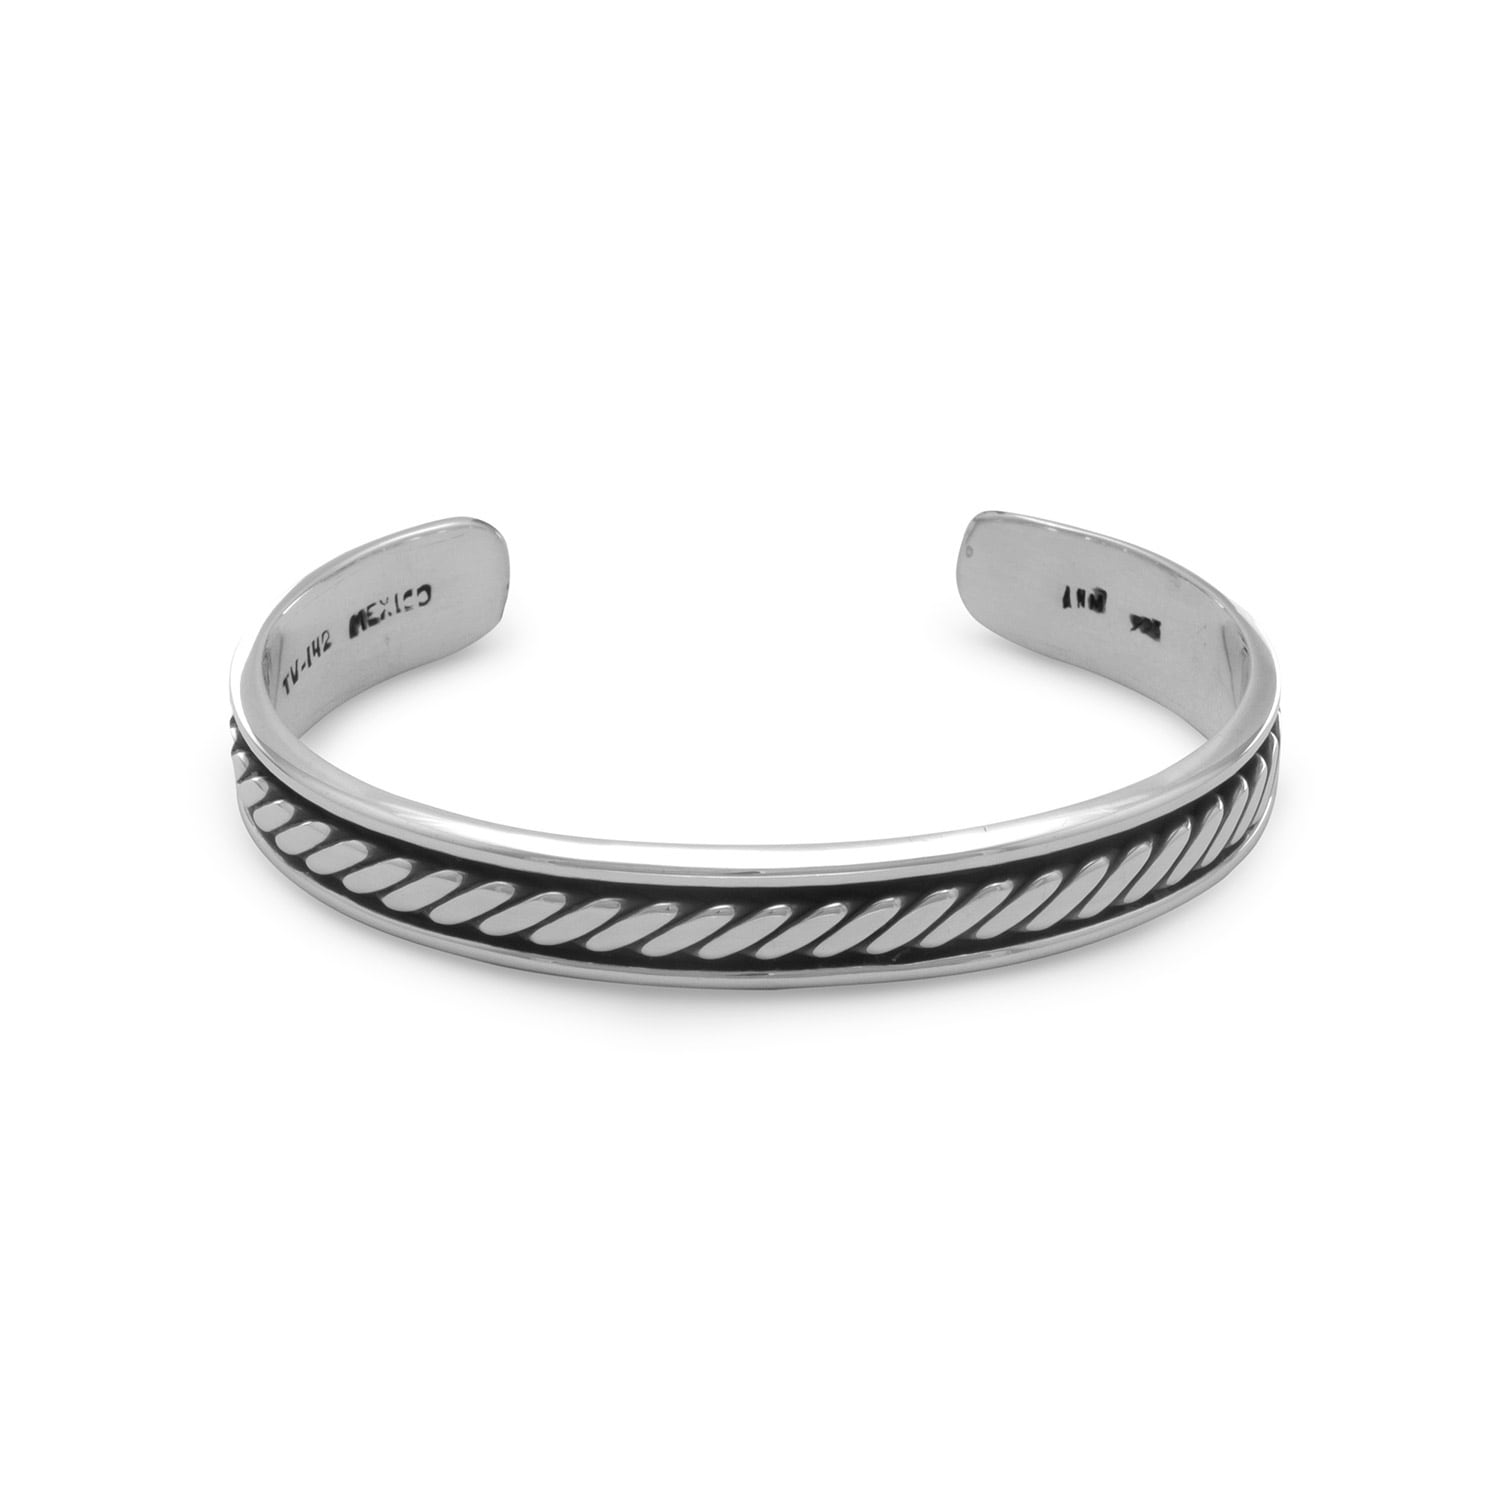 925 Silver plated  Identity Bracelet 8 inches long 10 mm wide 